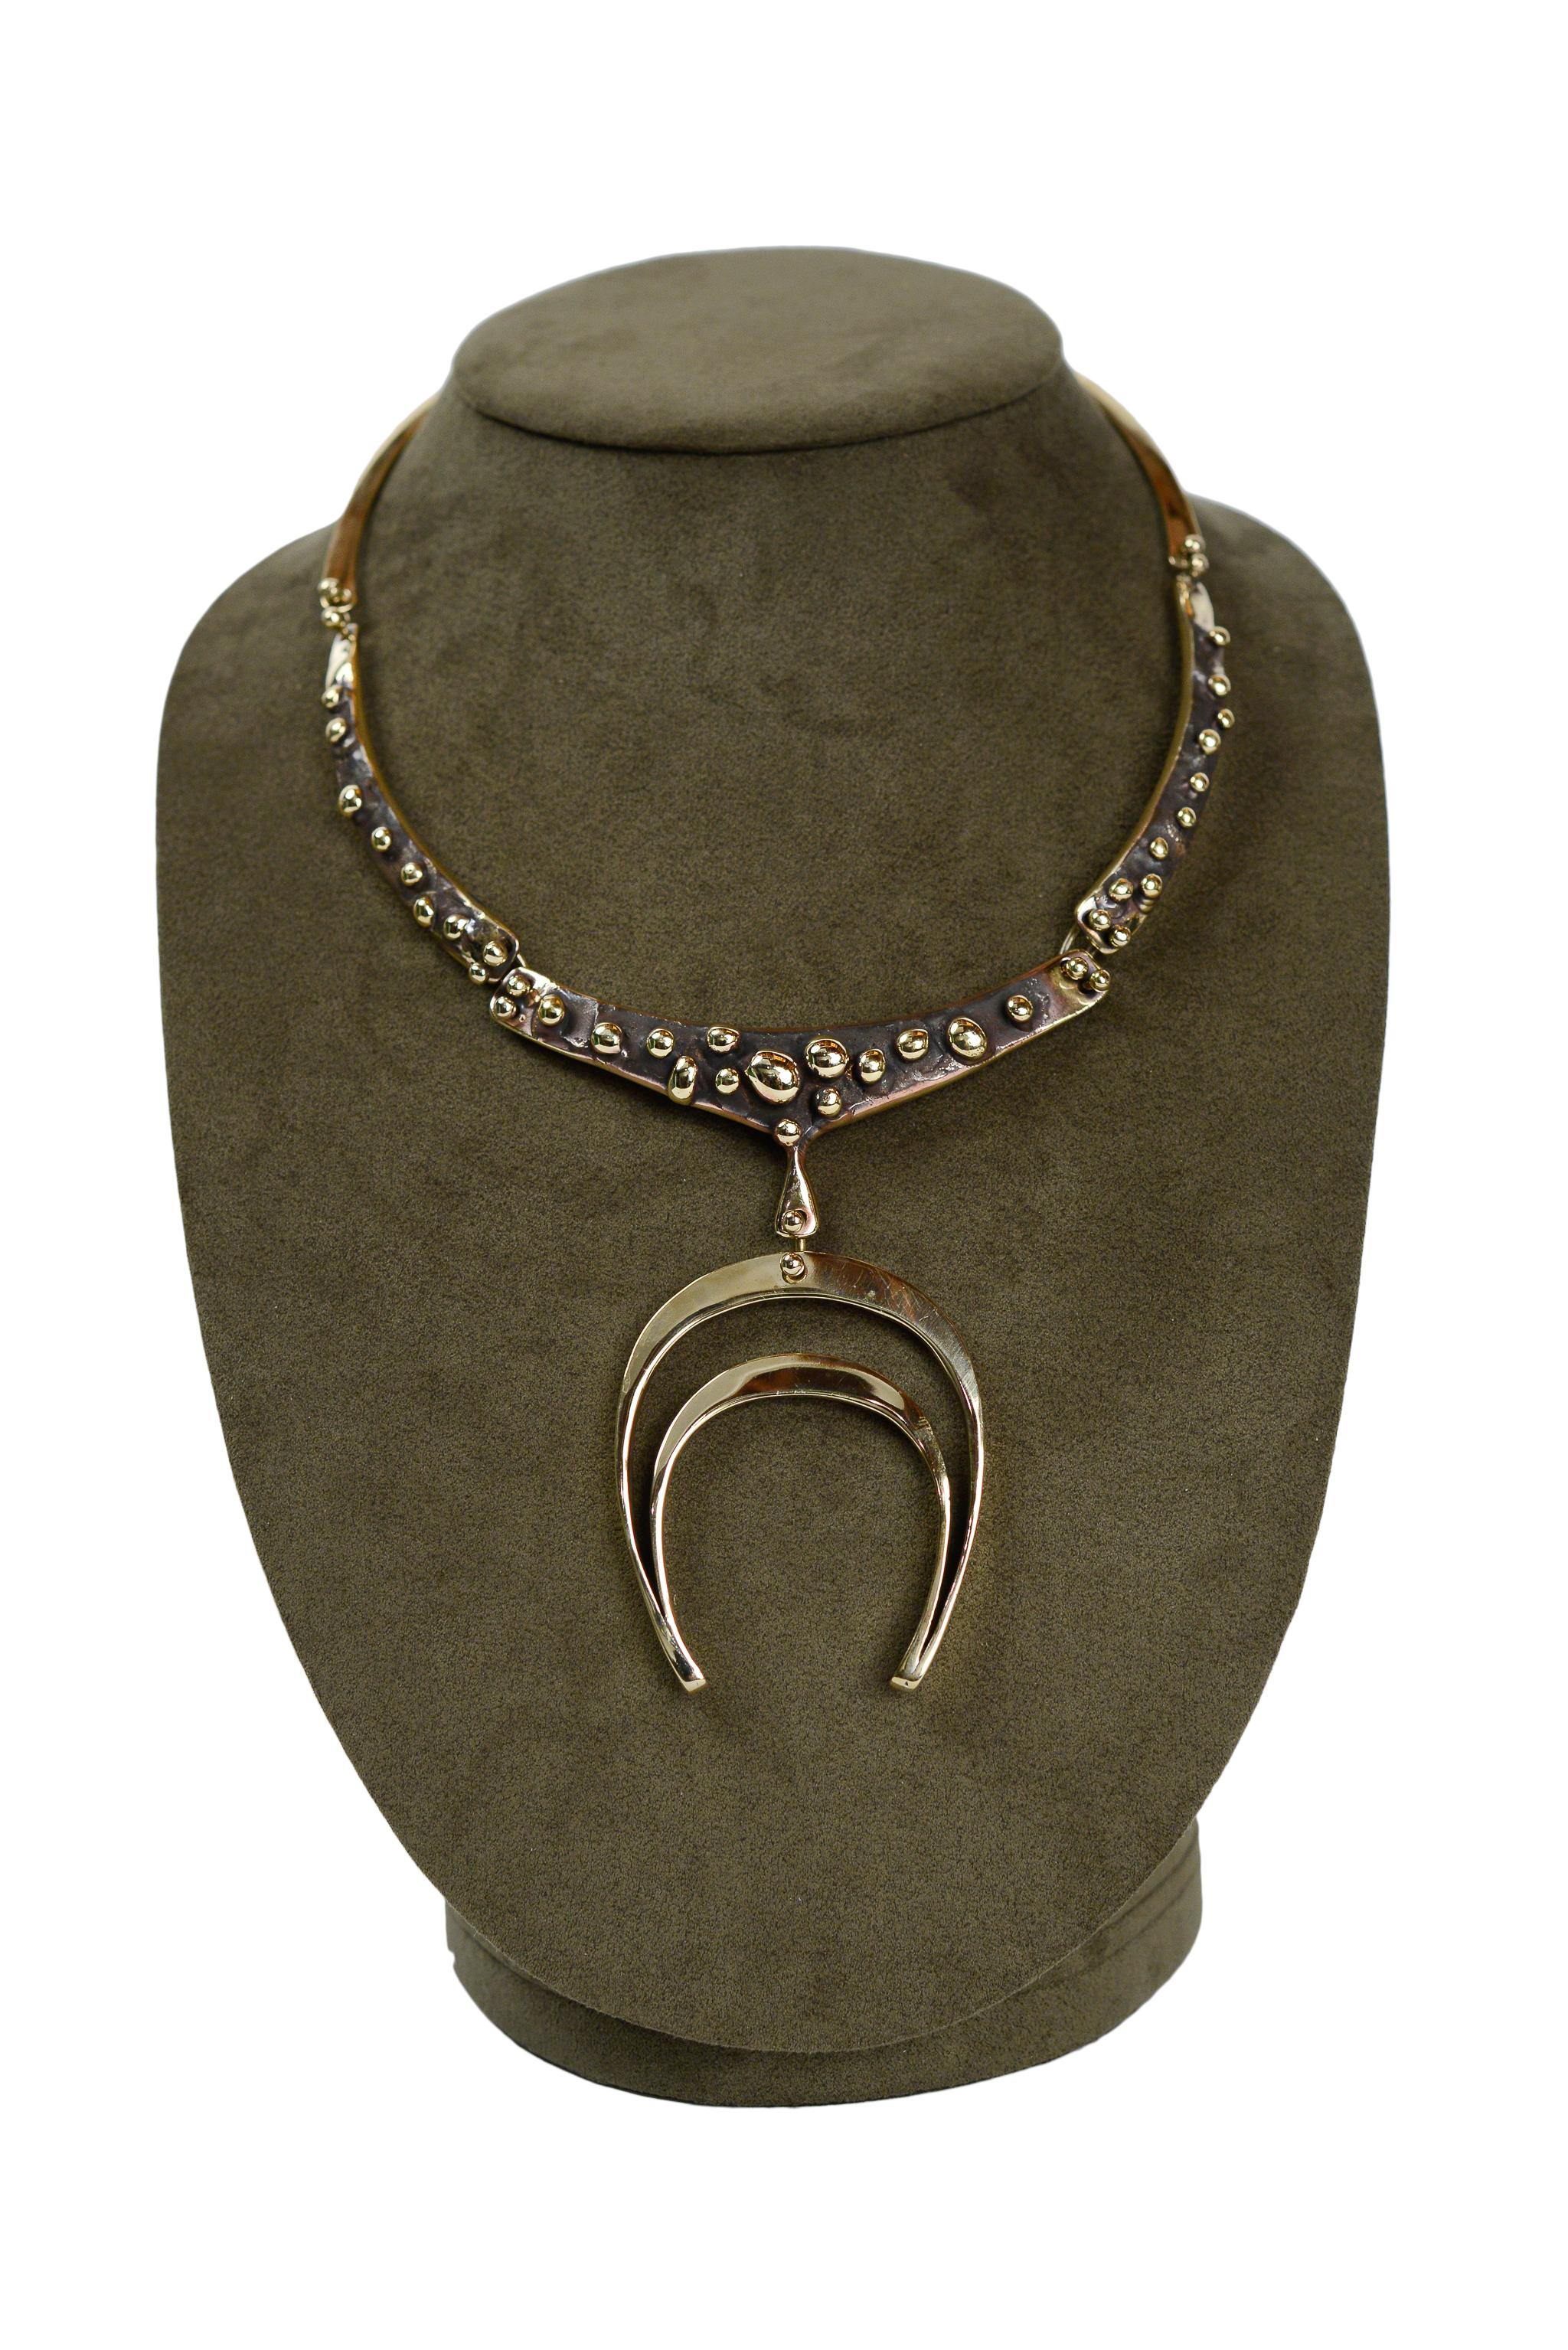 Resurrection Vintage is excited to offer an original hand-forged vintage Jack Boyd bronze necklace featuring 